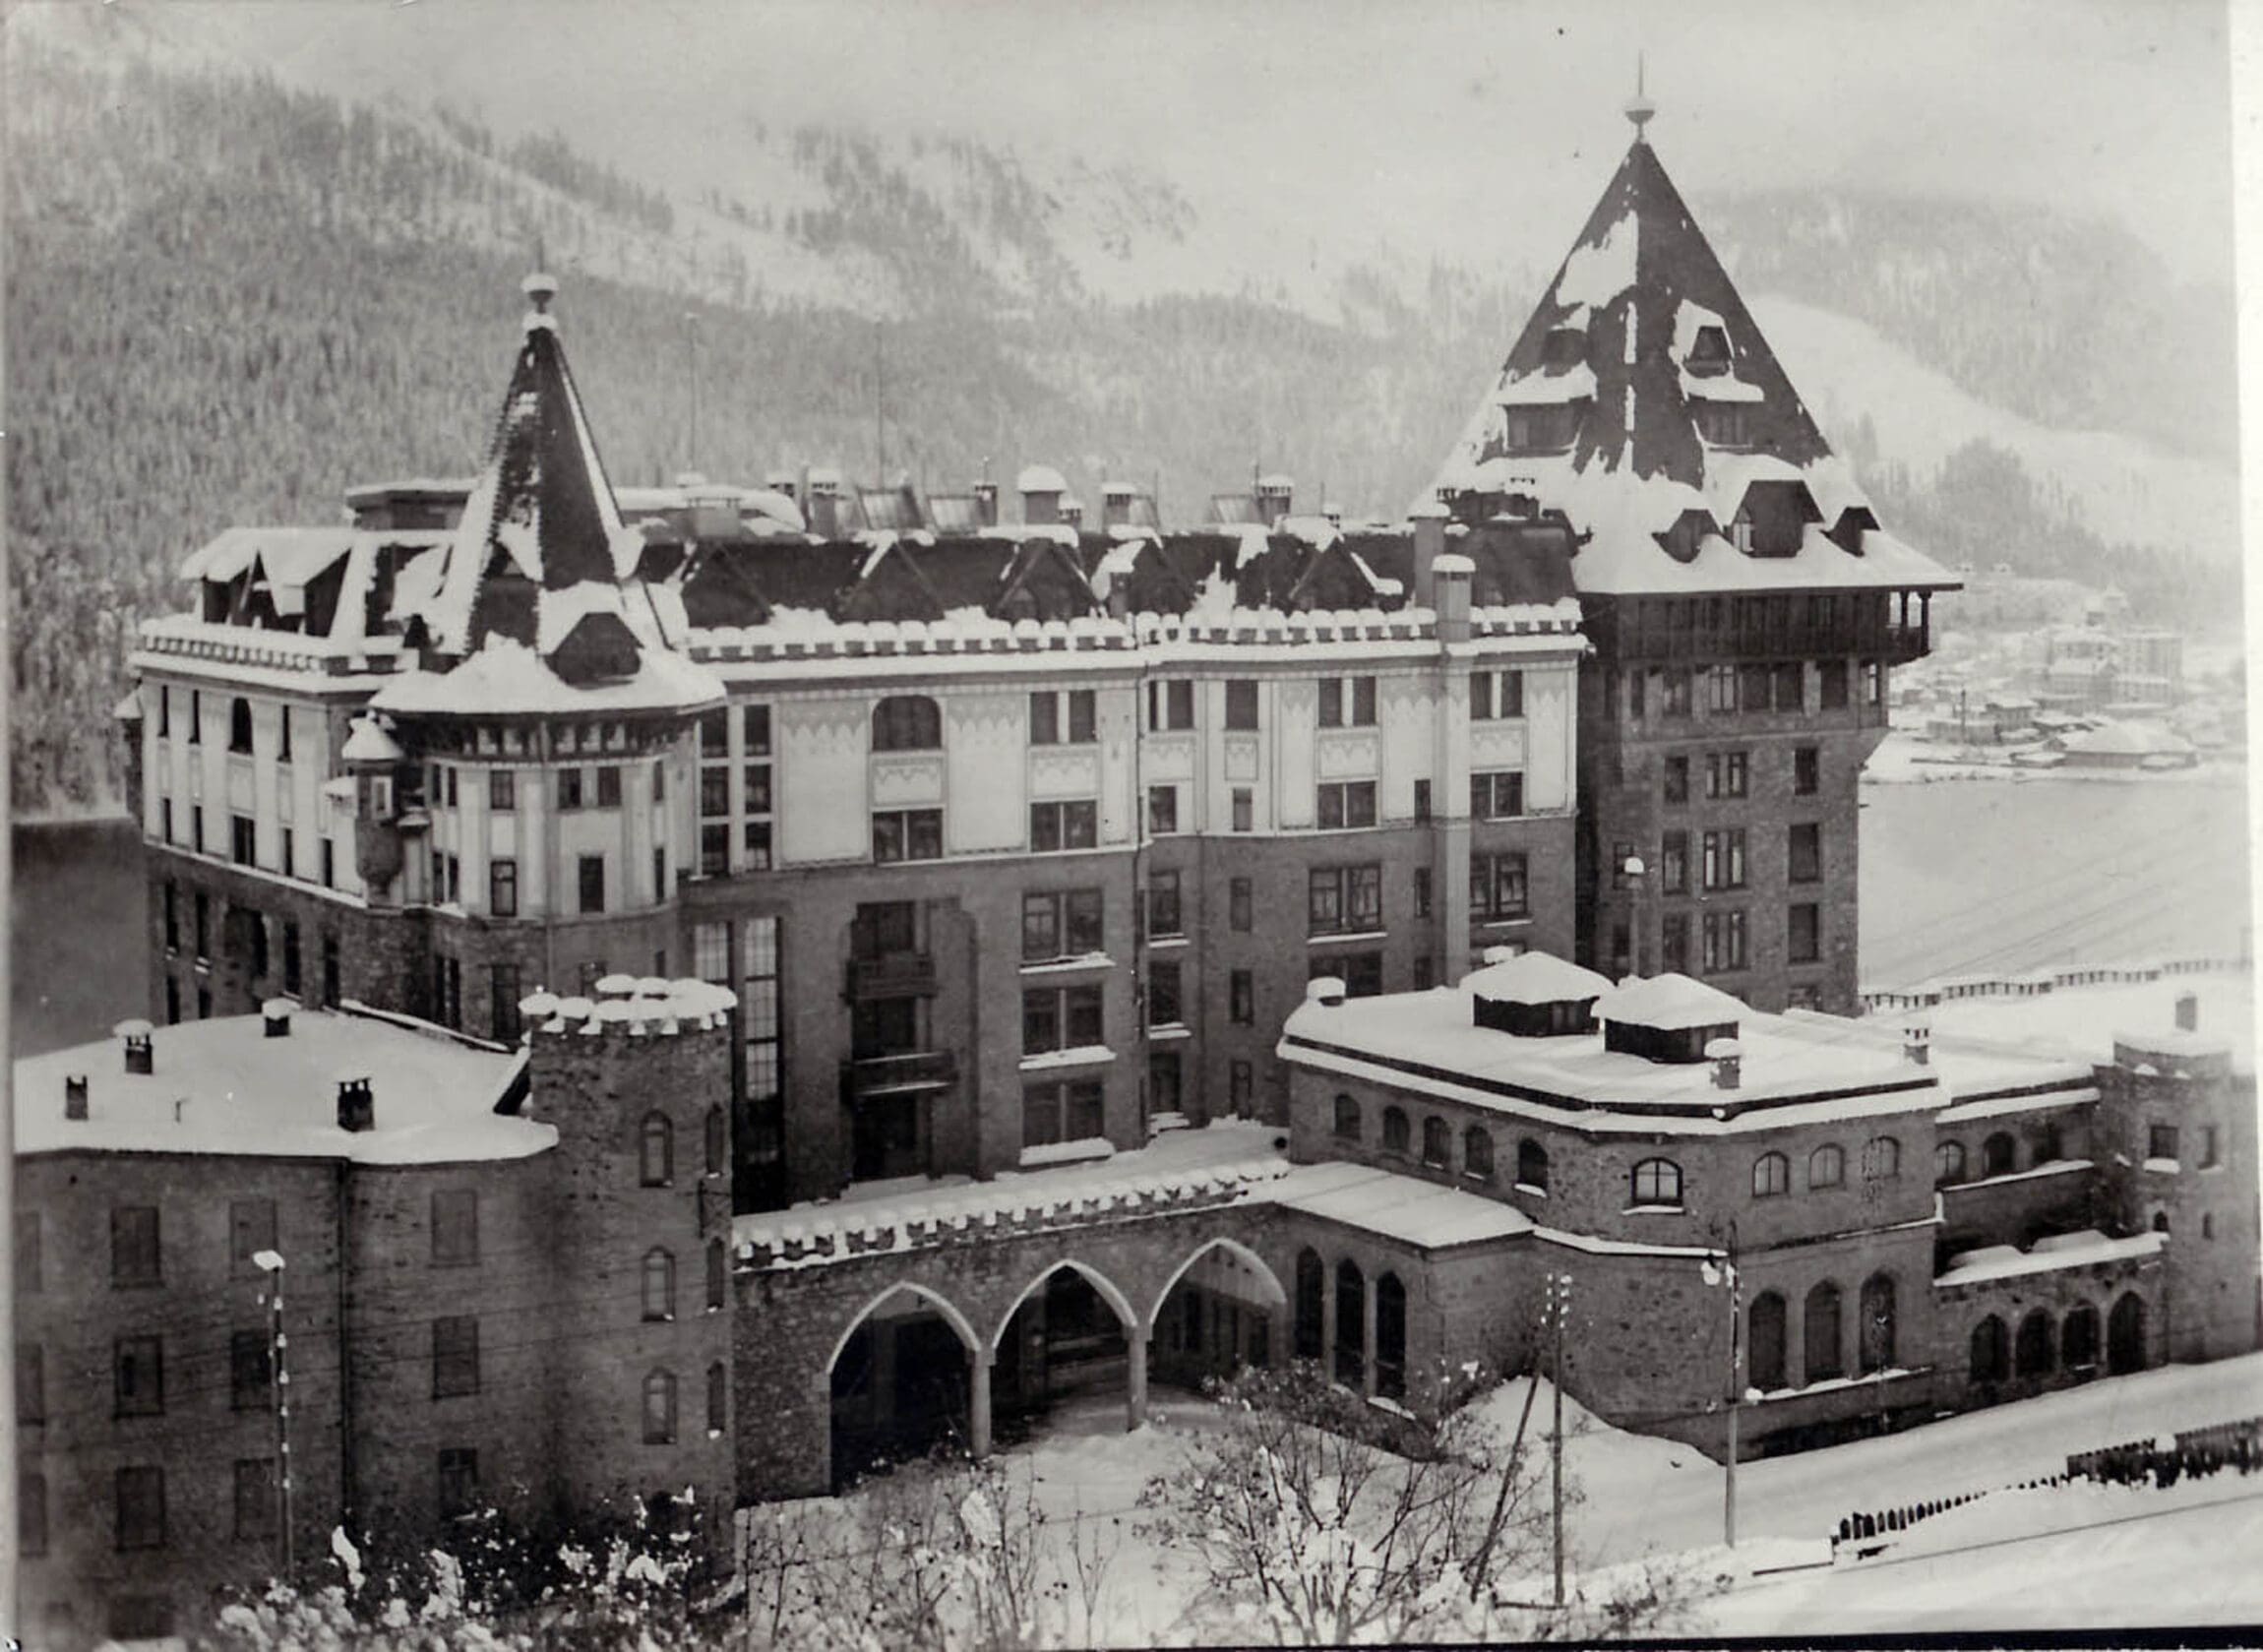 An old black and white photo of Badrutt's Palace in St Moritz